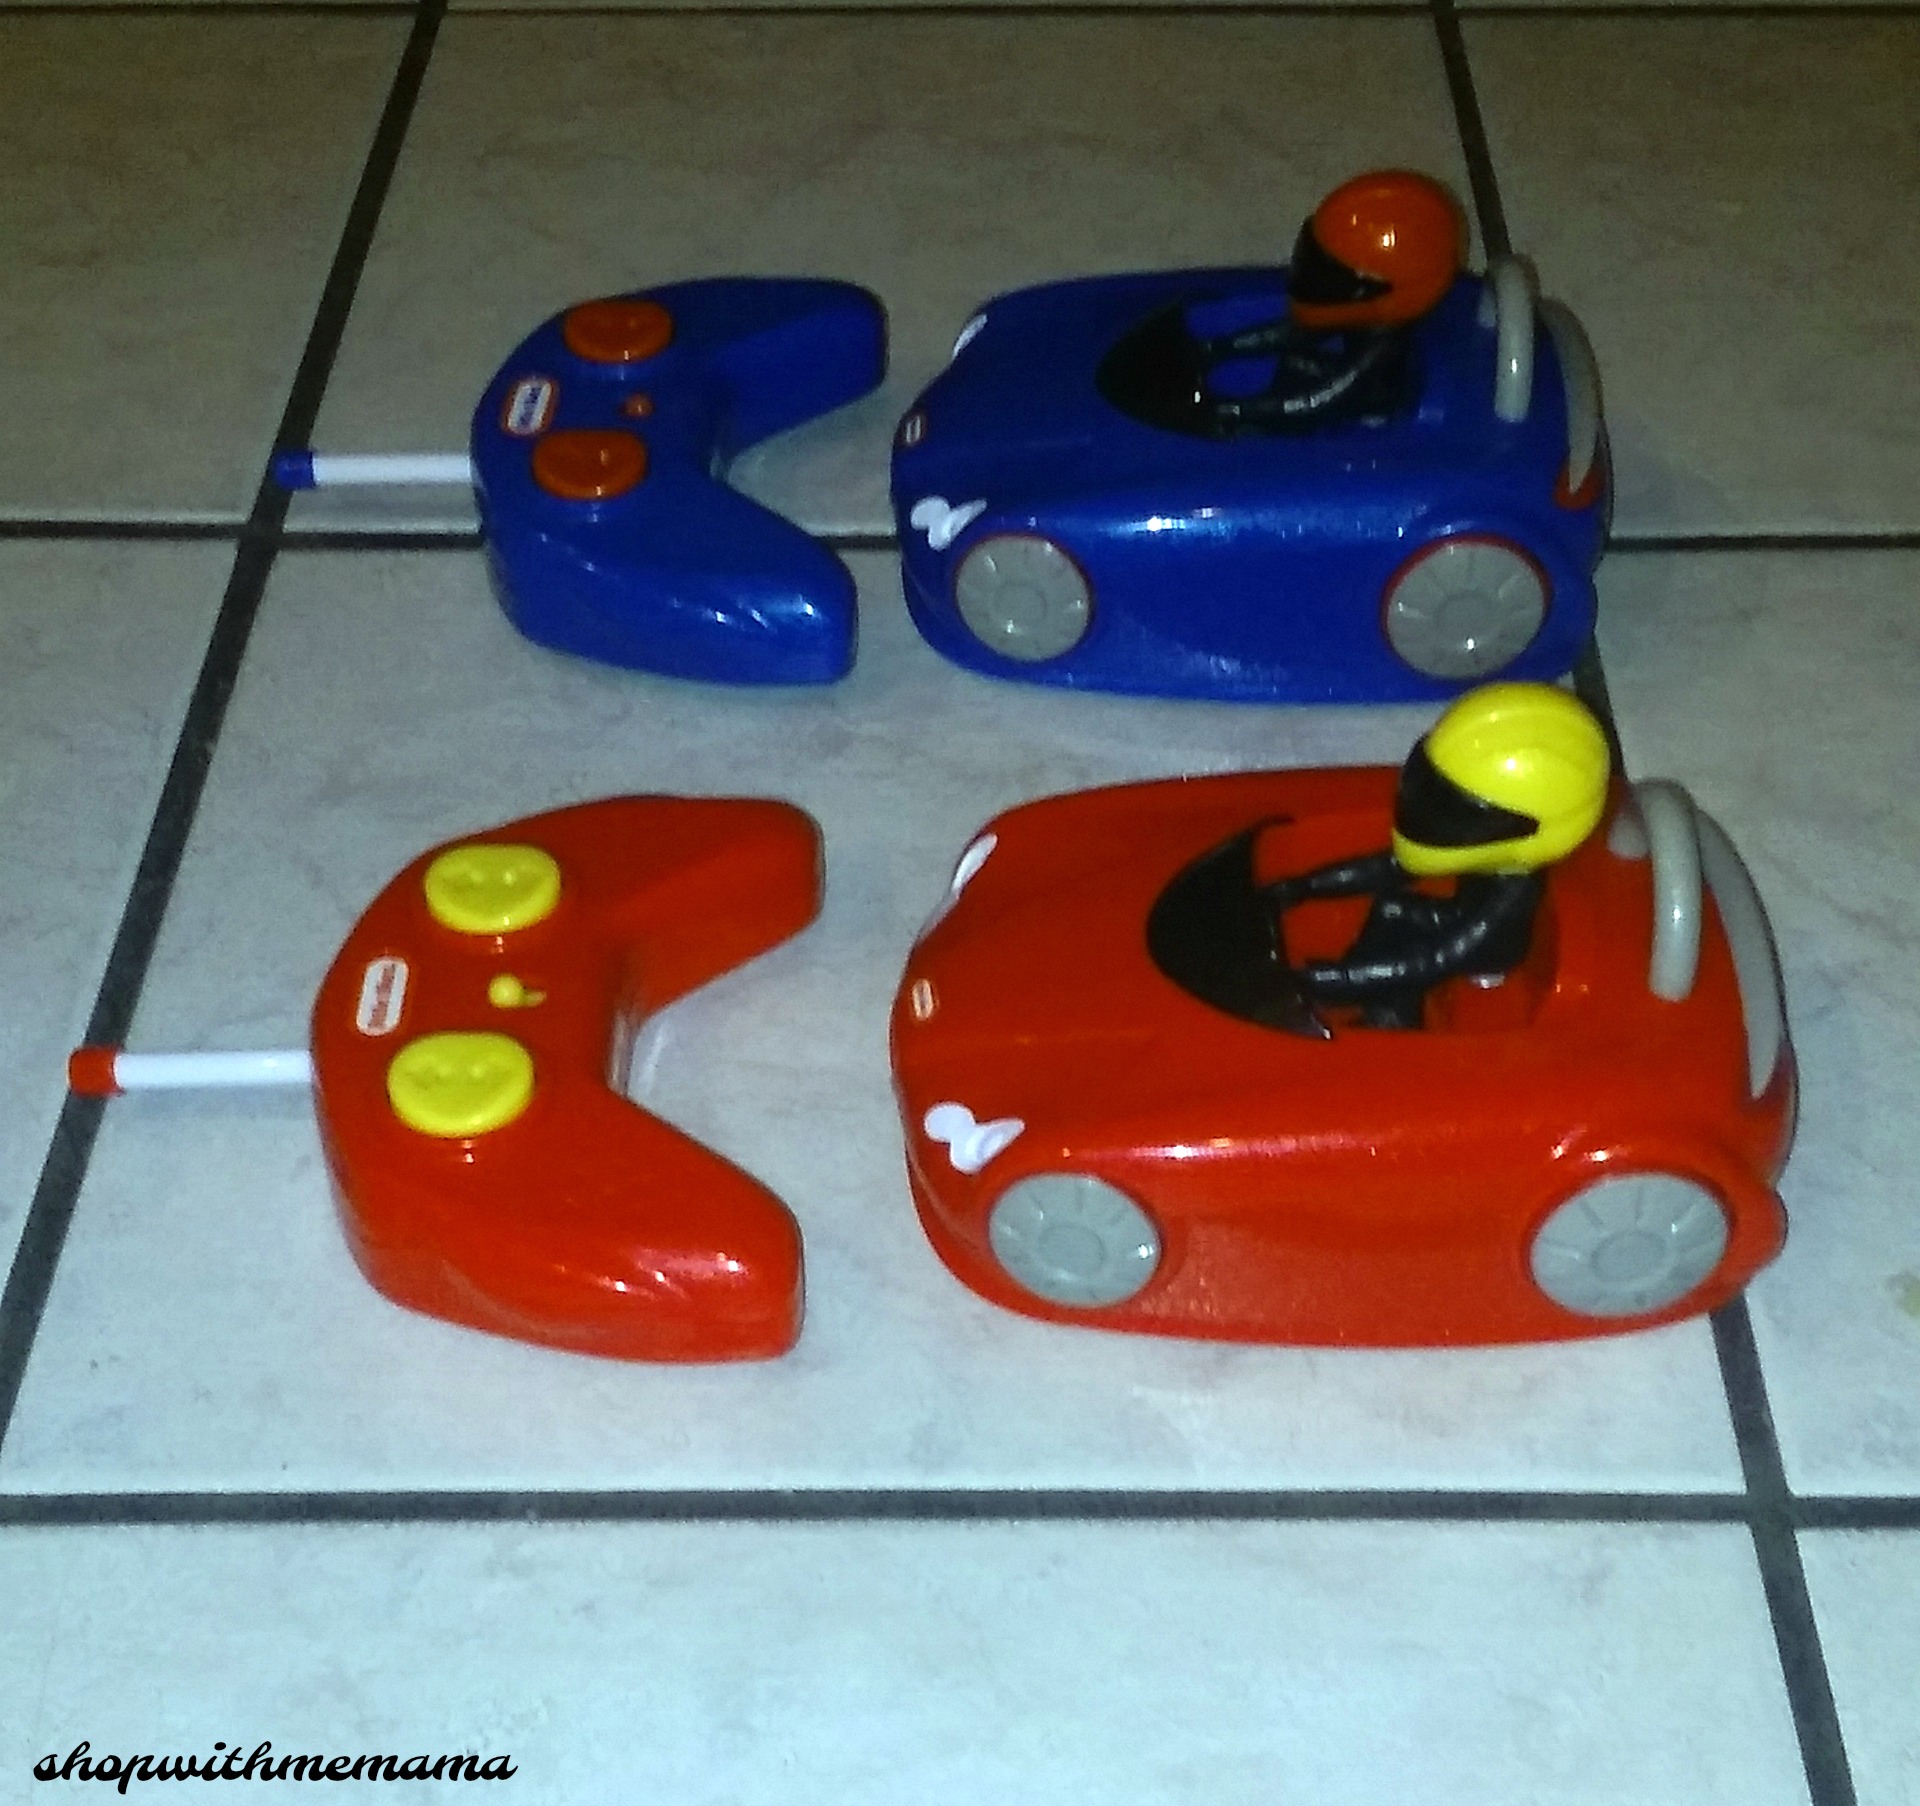 Check Out The Newest Little Tikes Toys